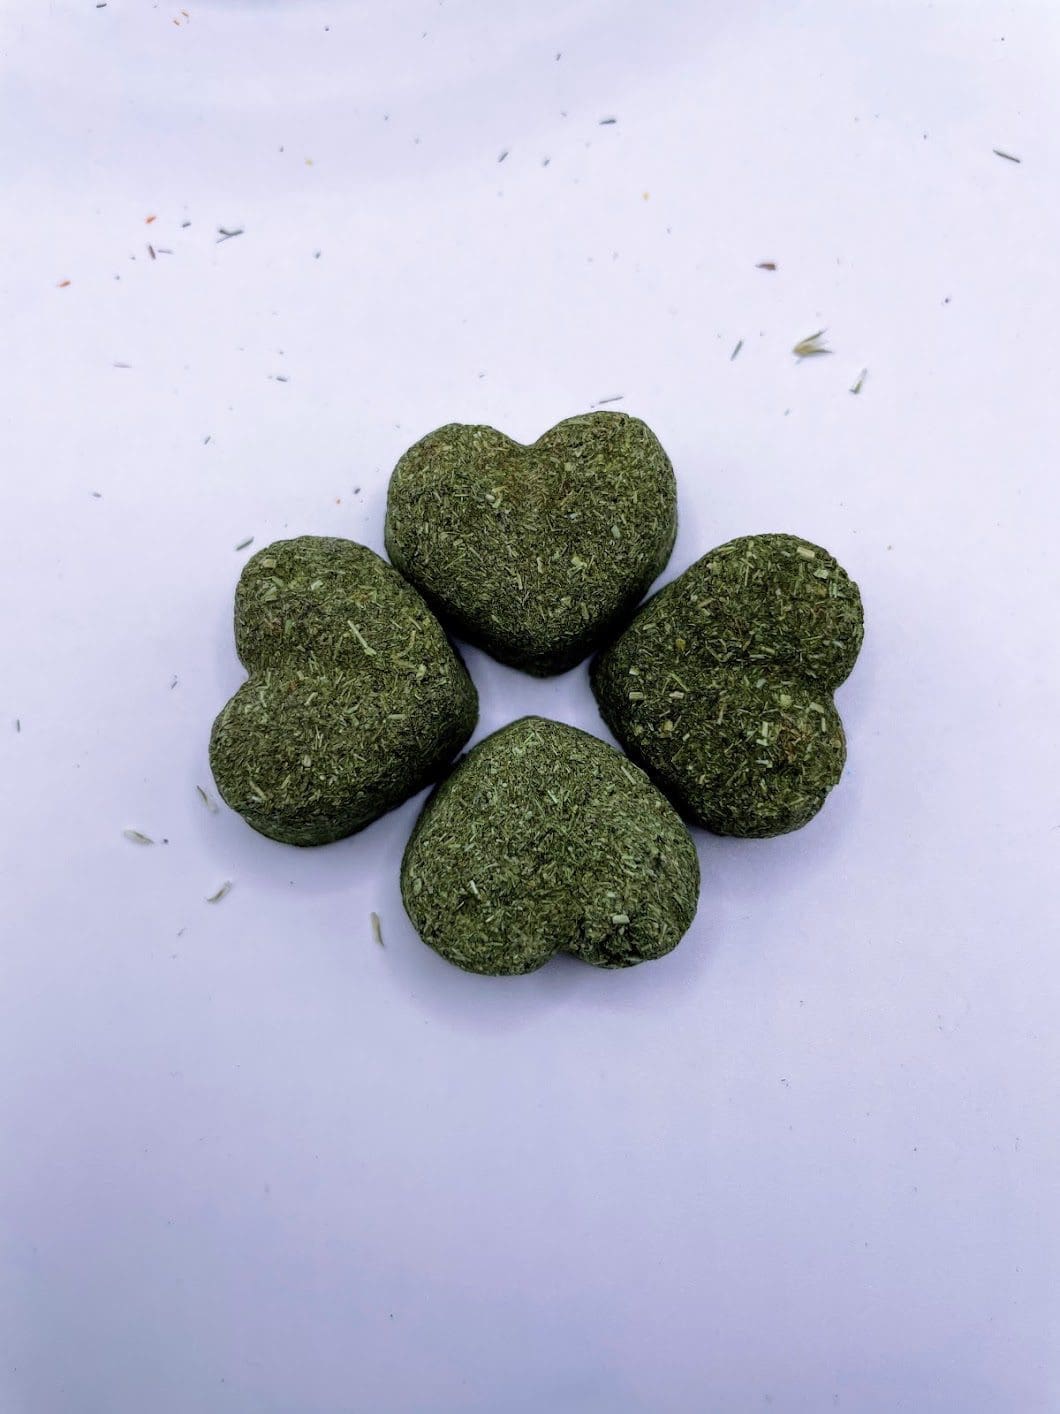 Mini Heart Timothy Hay Rabbit Treat. Also suitable for Chinchillas, Hamsters, Guinea Pigs, and other Small Rodents